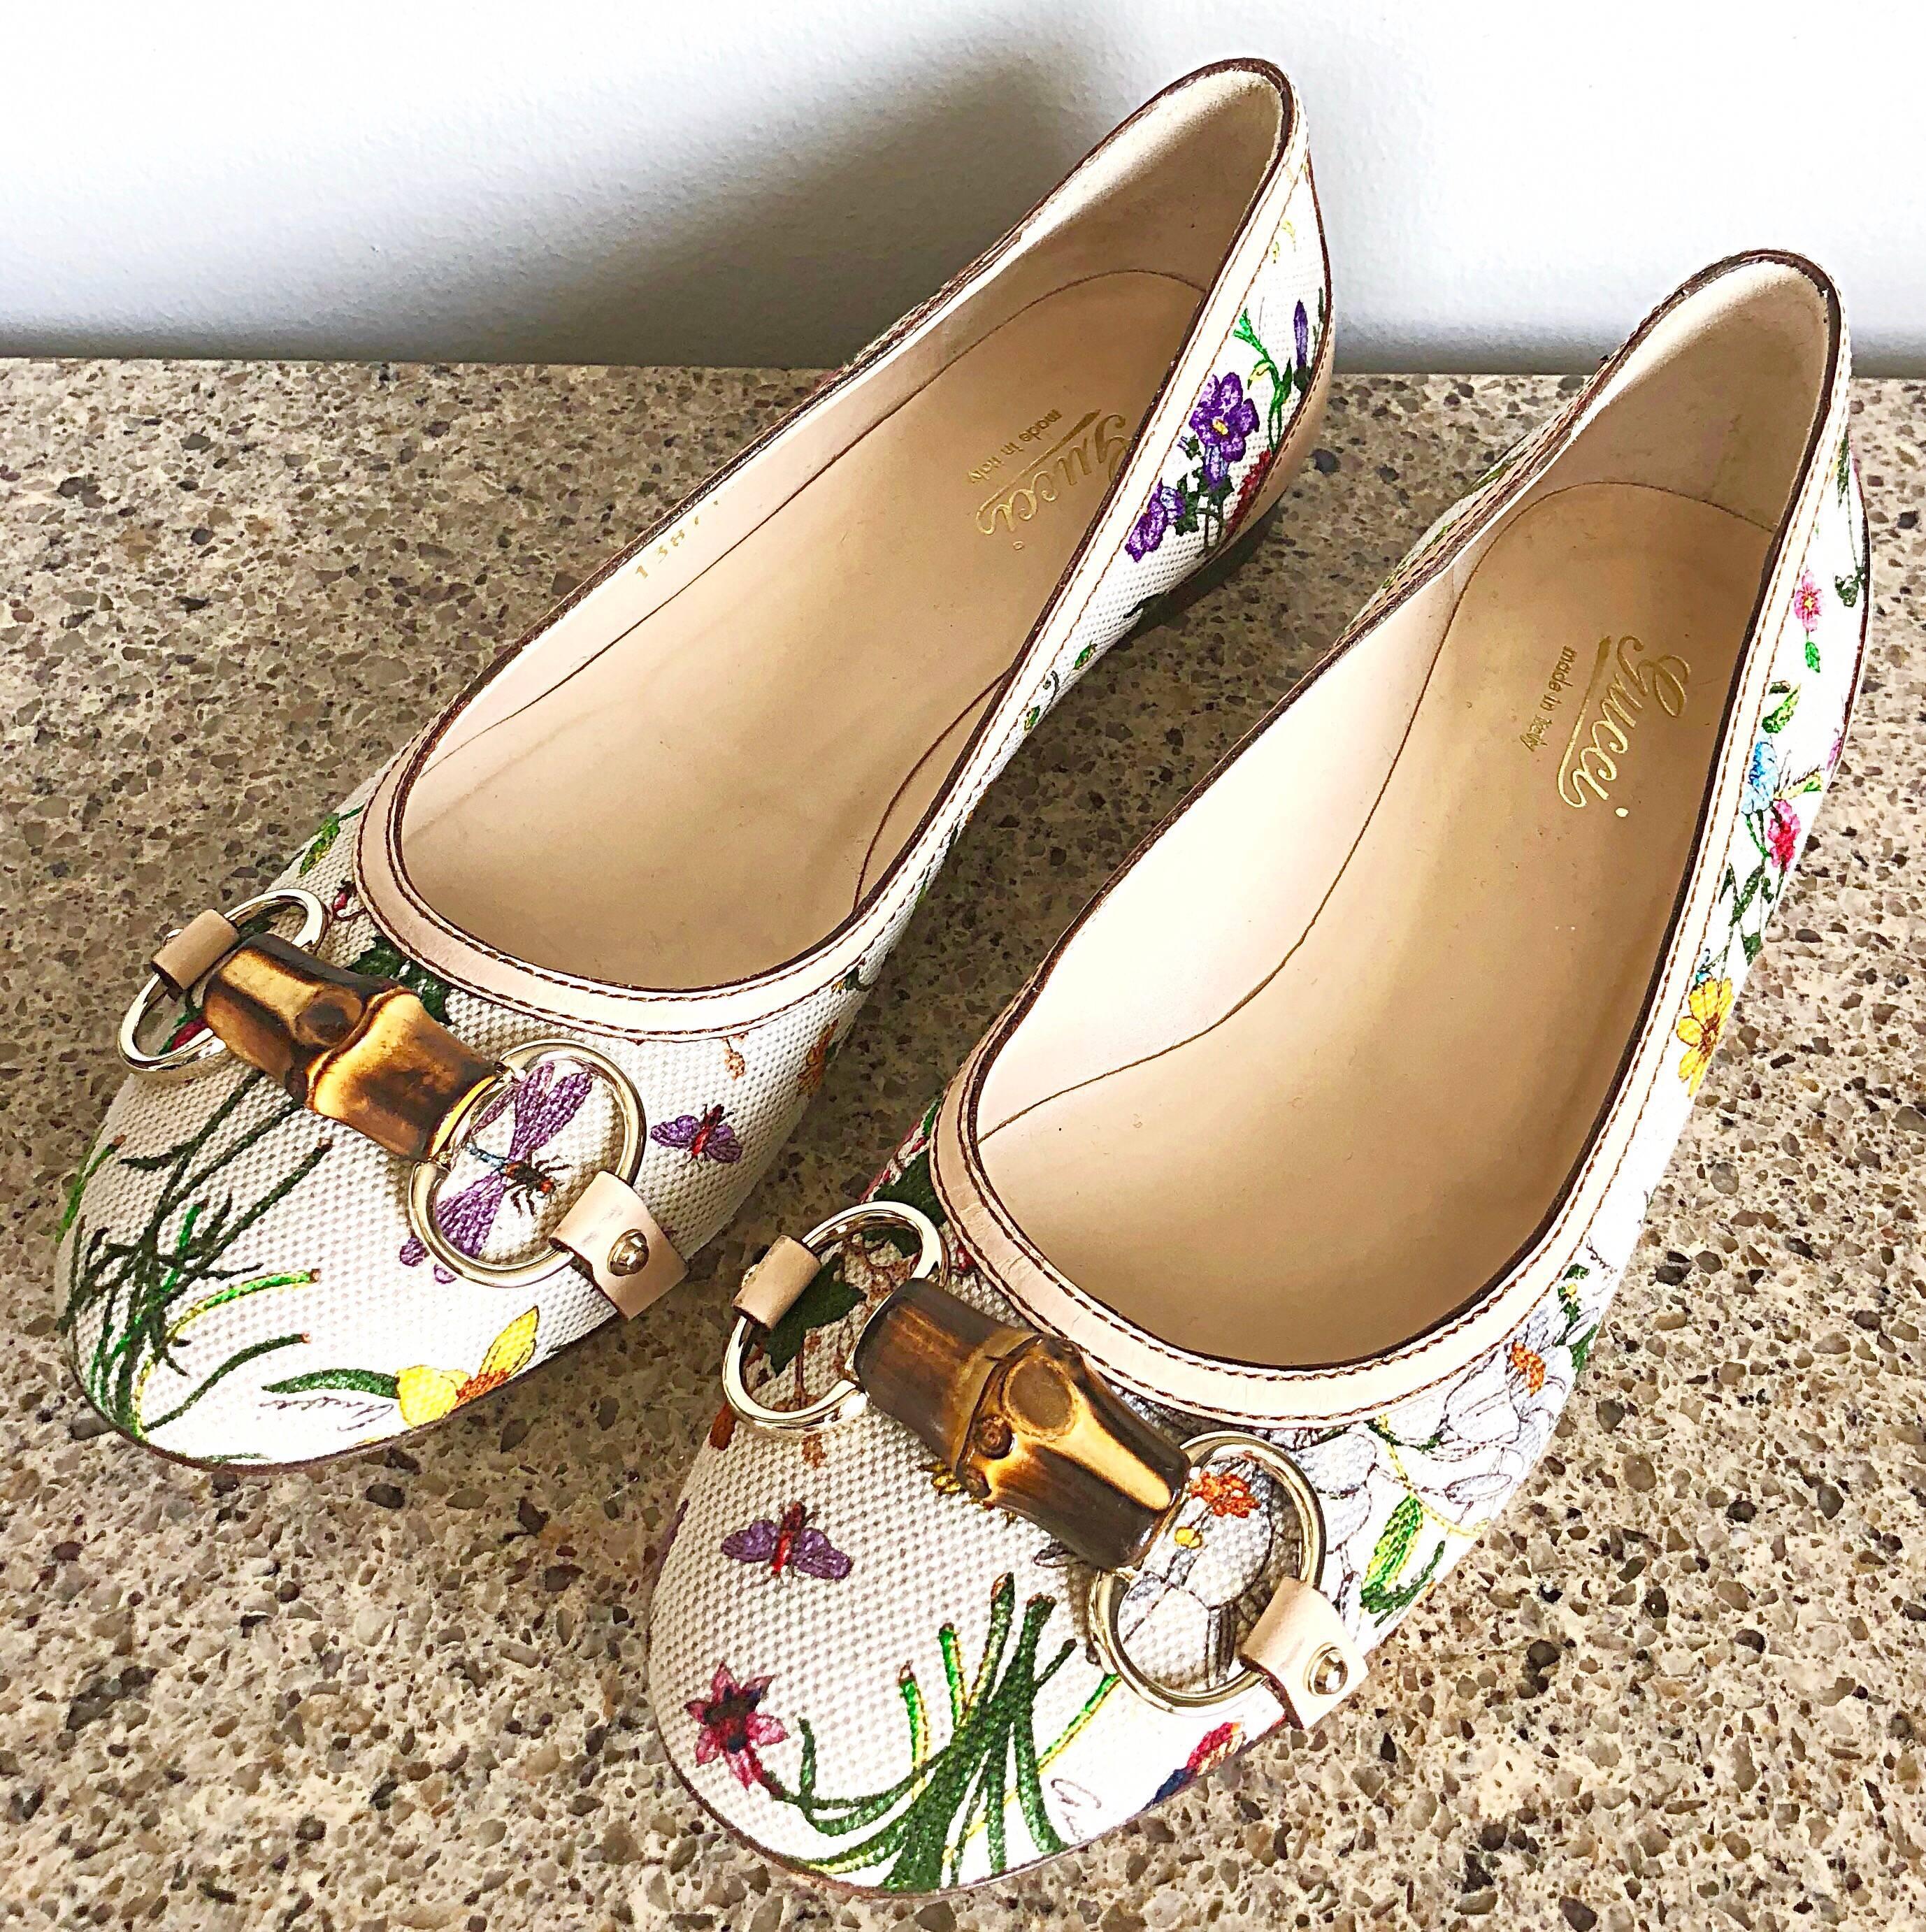 Chic classic GUCCI flora print ballet flats! Features the signature flora print throughout, with a horsebit on the front of each shoe. Nude leather details. Can easily be dressed up or down. Great with jeans, shorts, a skirt or dress. Only worn